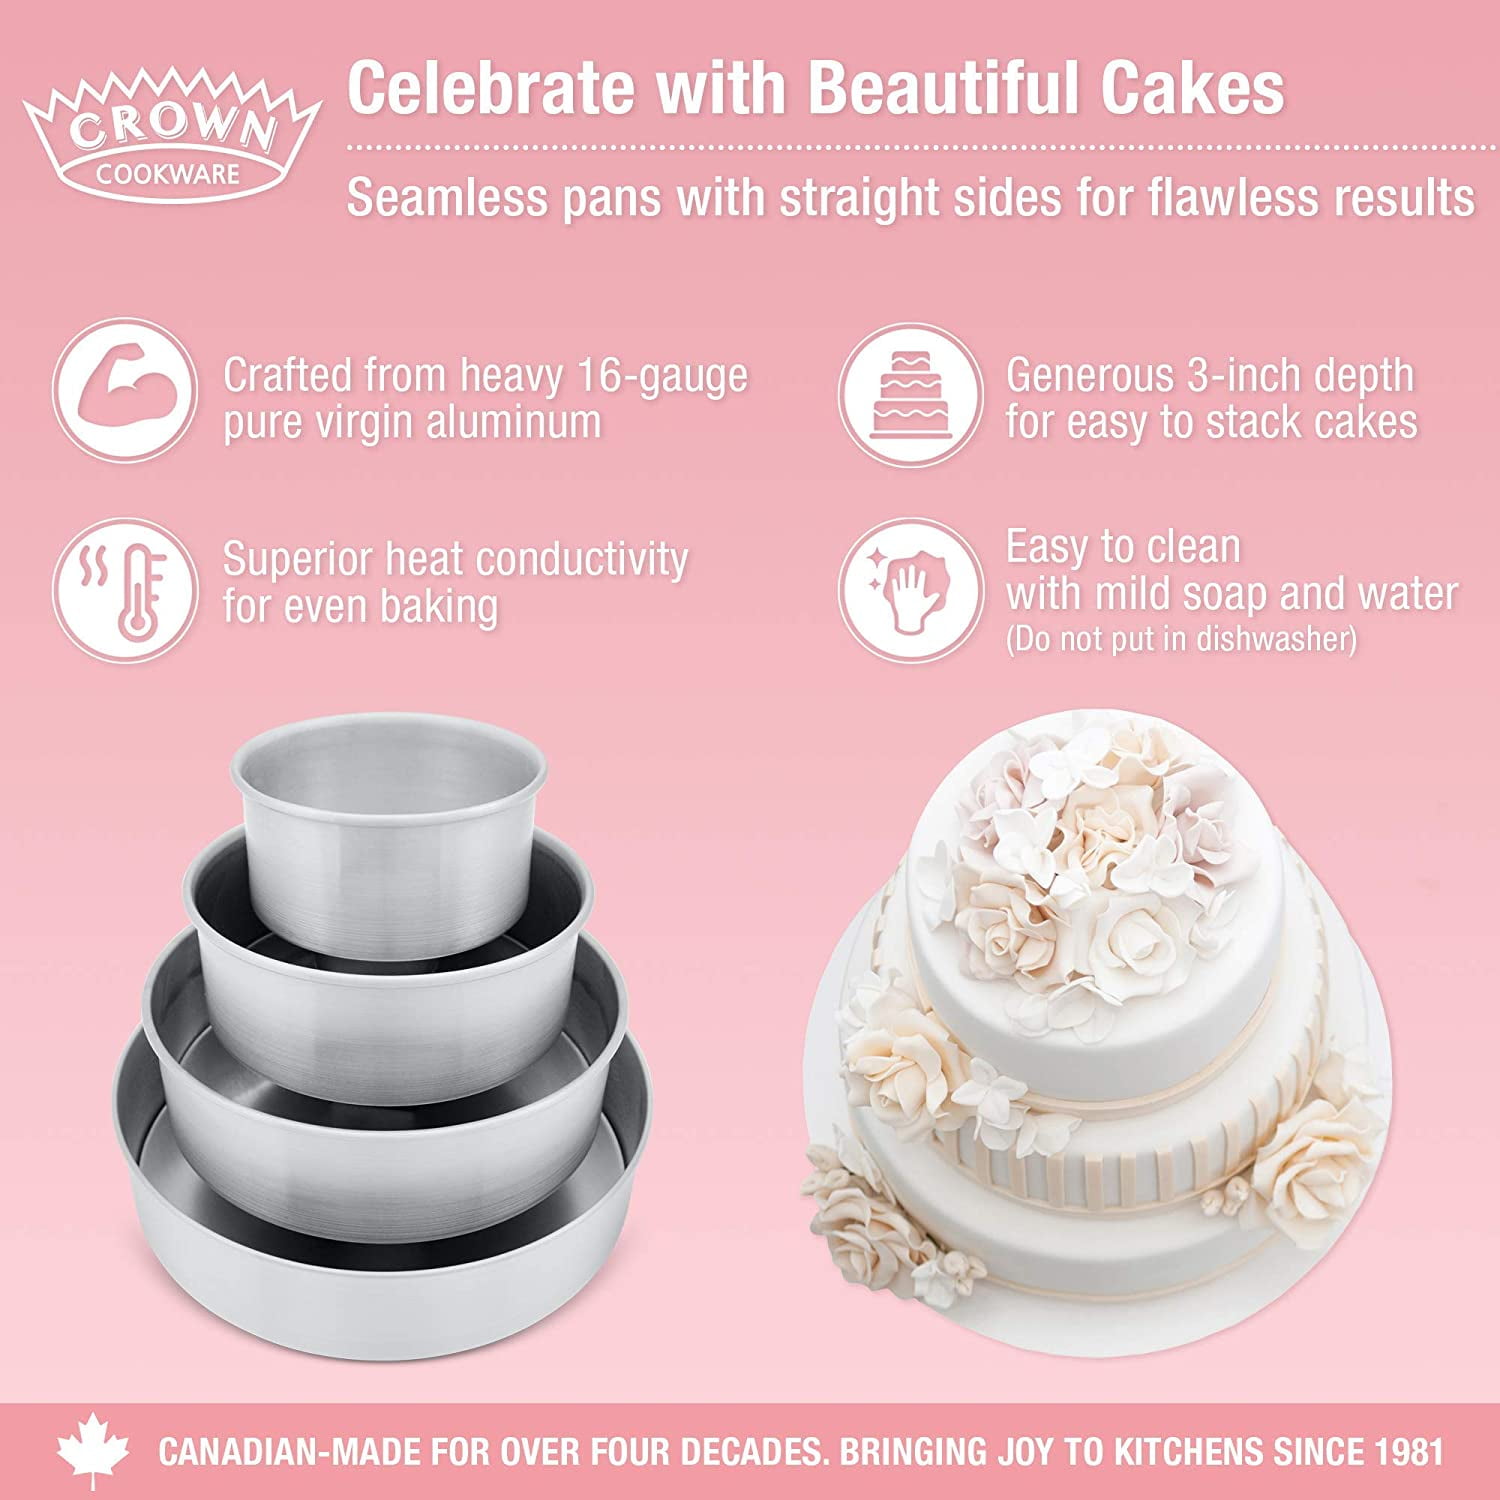 Wedding Cake Sizes: A Complete Guide